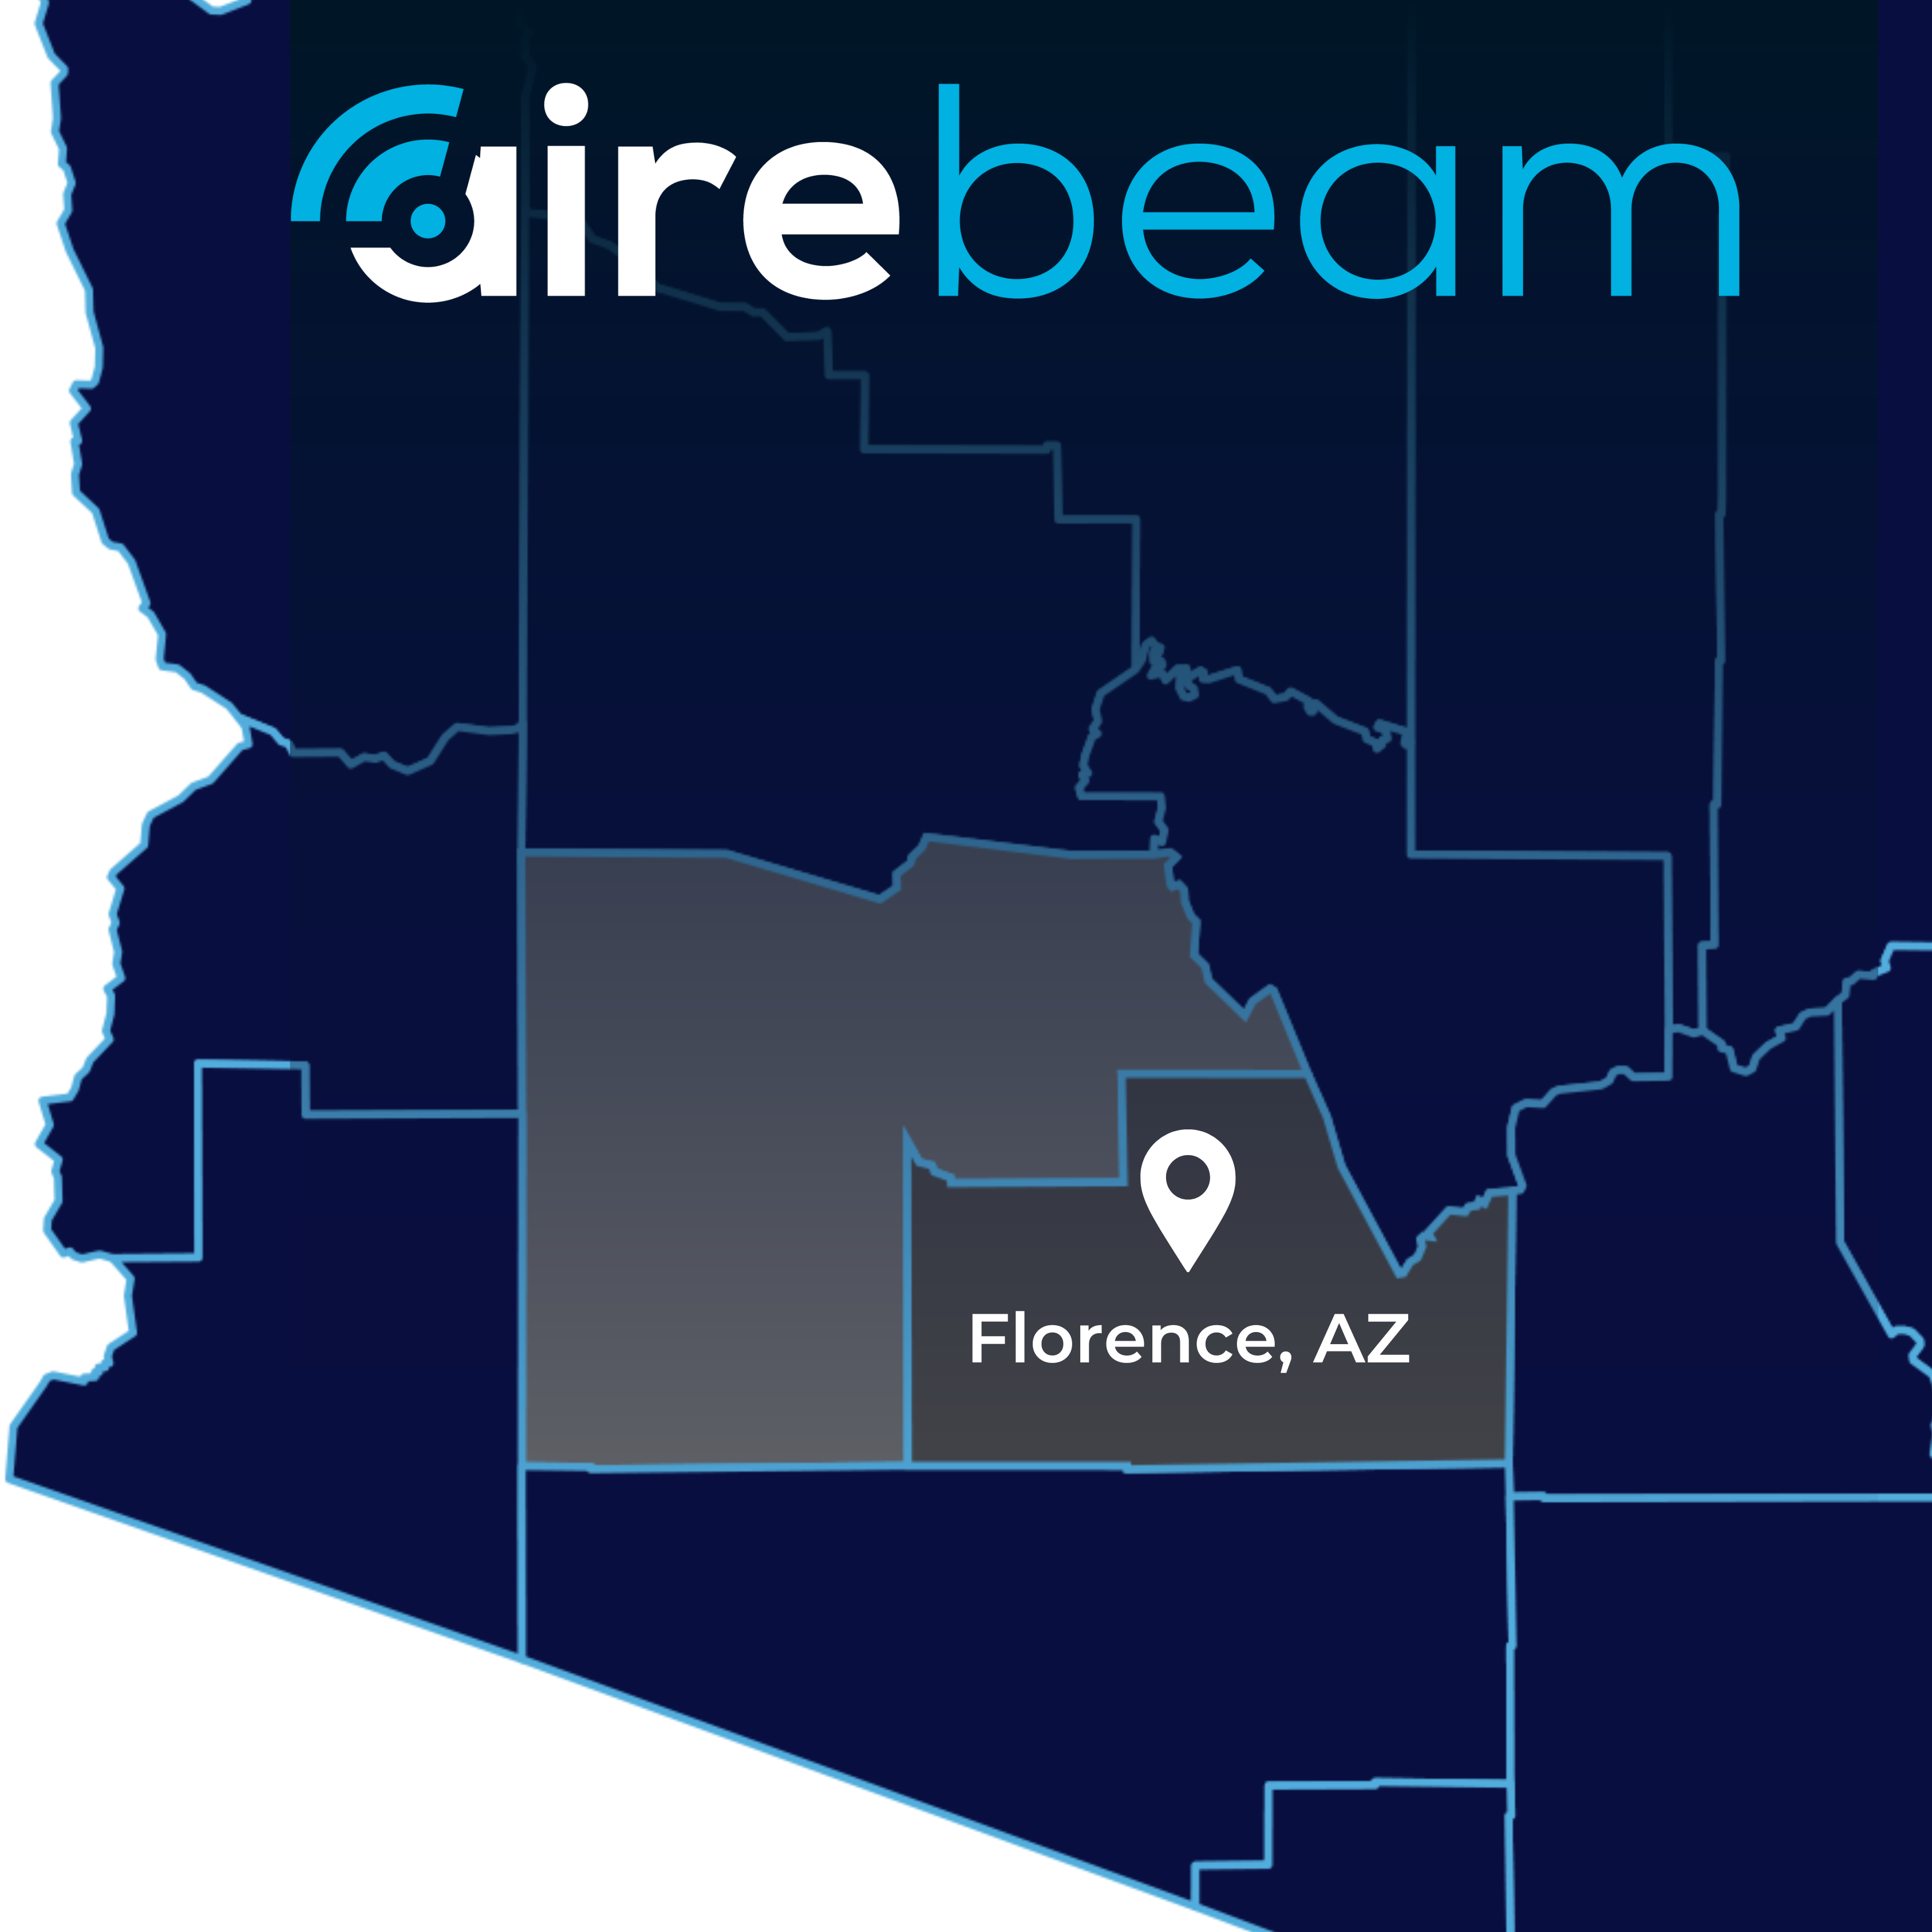 AireBeam Fiber Internet is Coming to Florence, AZ